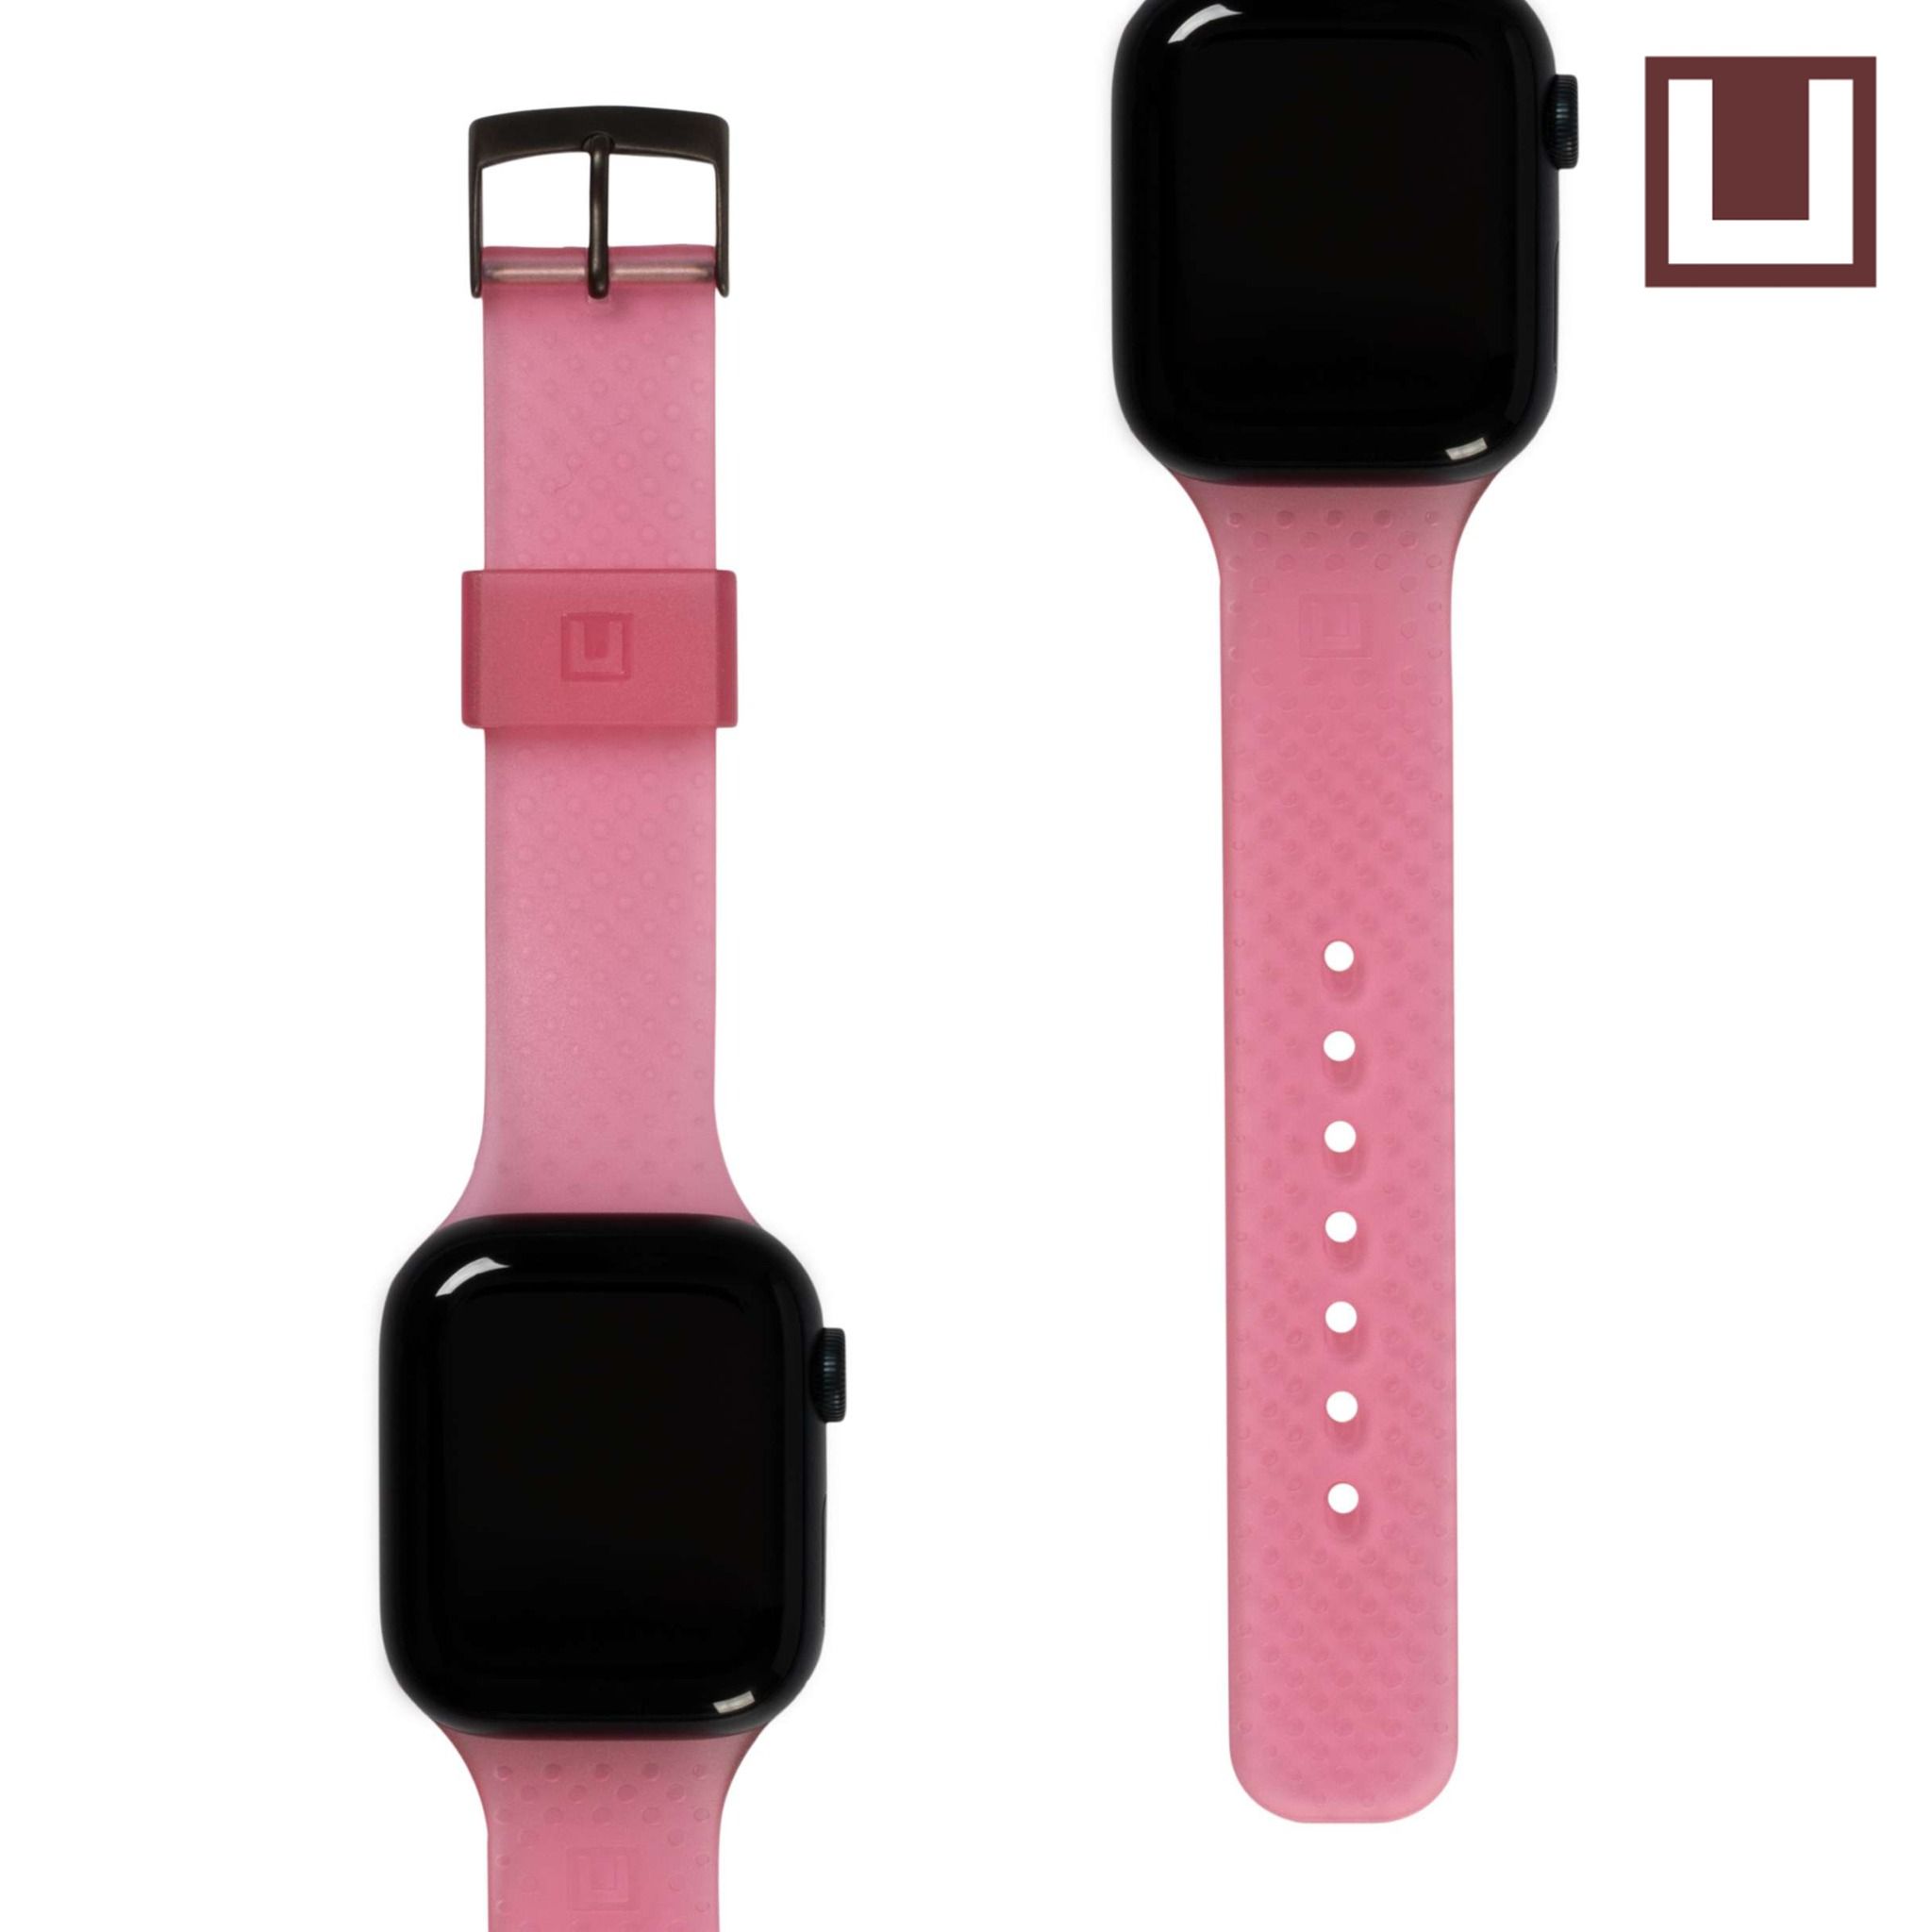  [U] Dây đồng hồ Lucent Silicone cho Apple Watch 